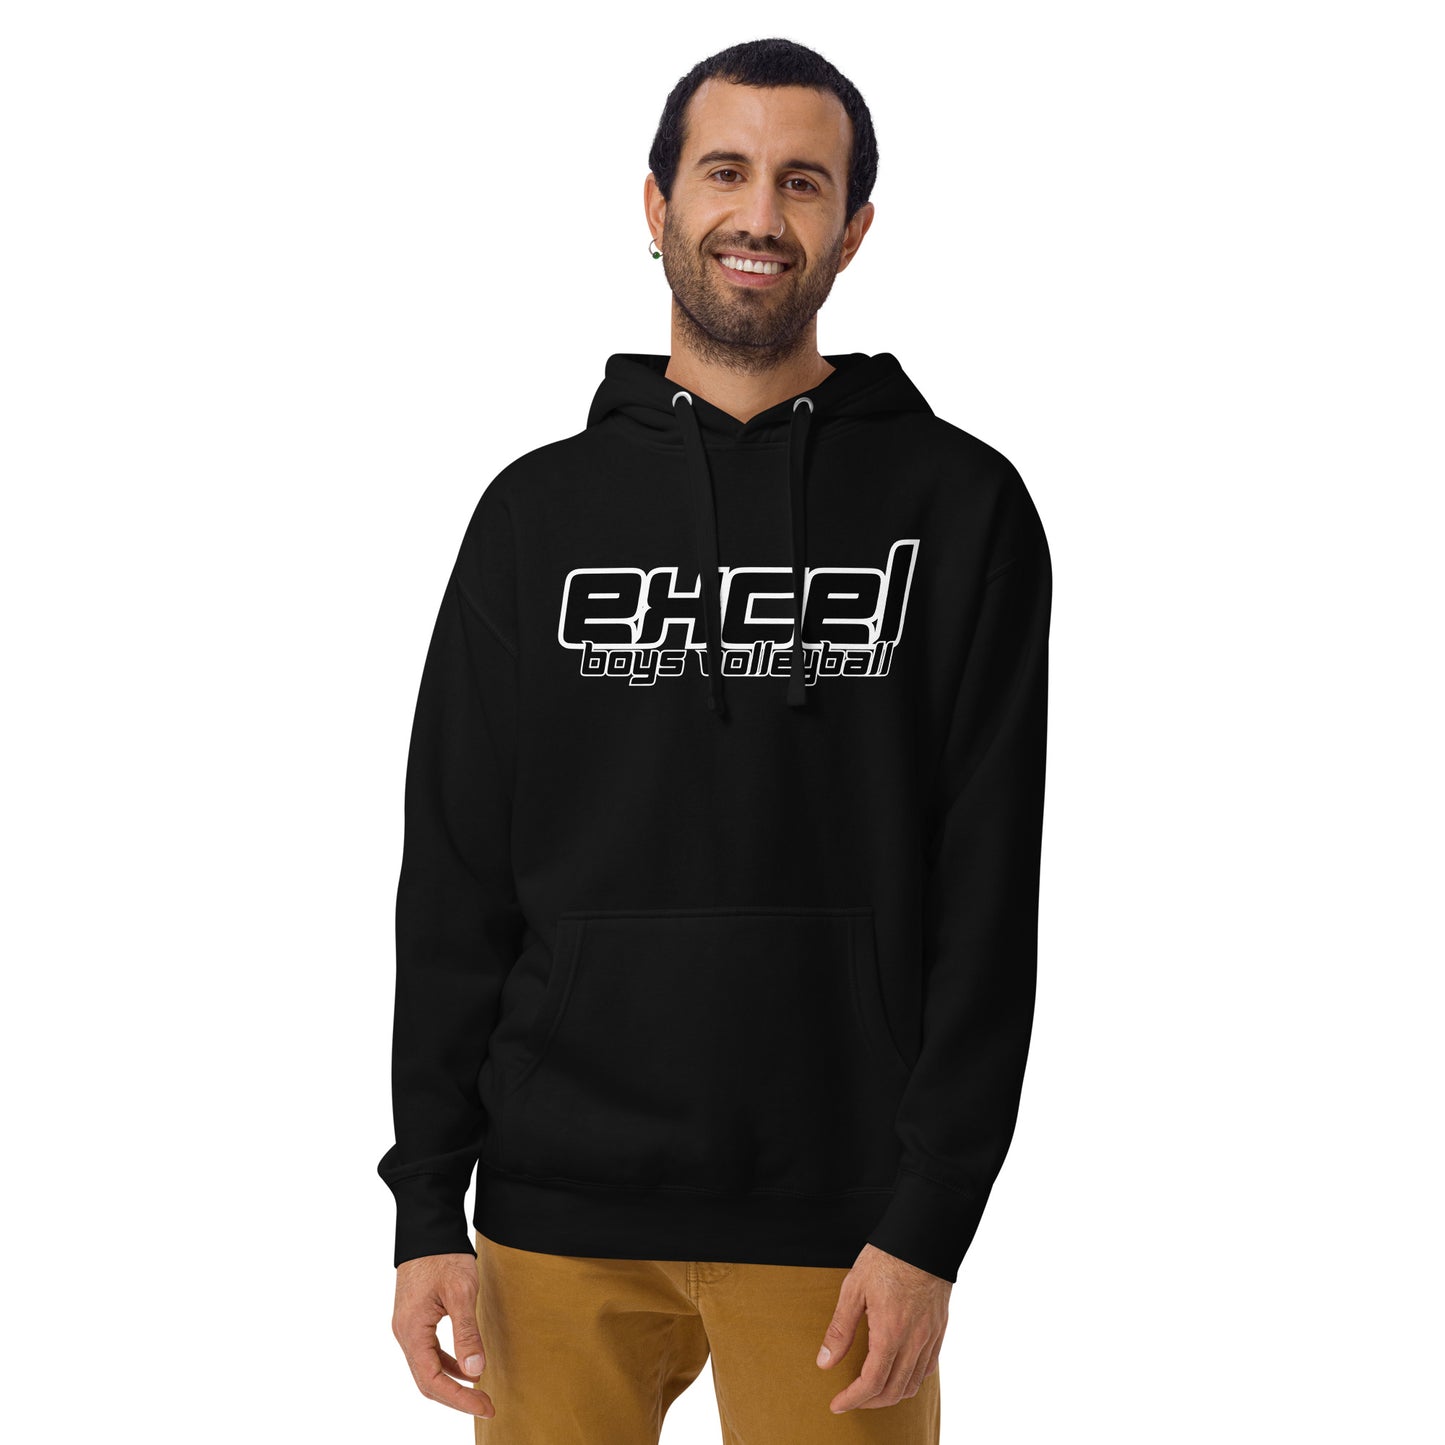 Excel - Boys Volleyball - Unisex Hoodie